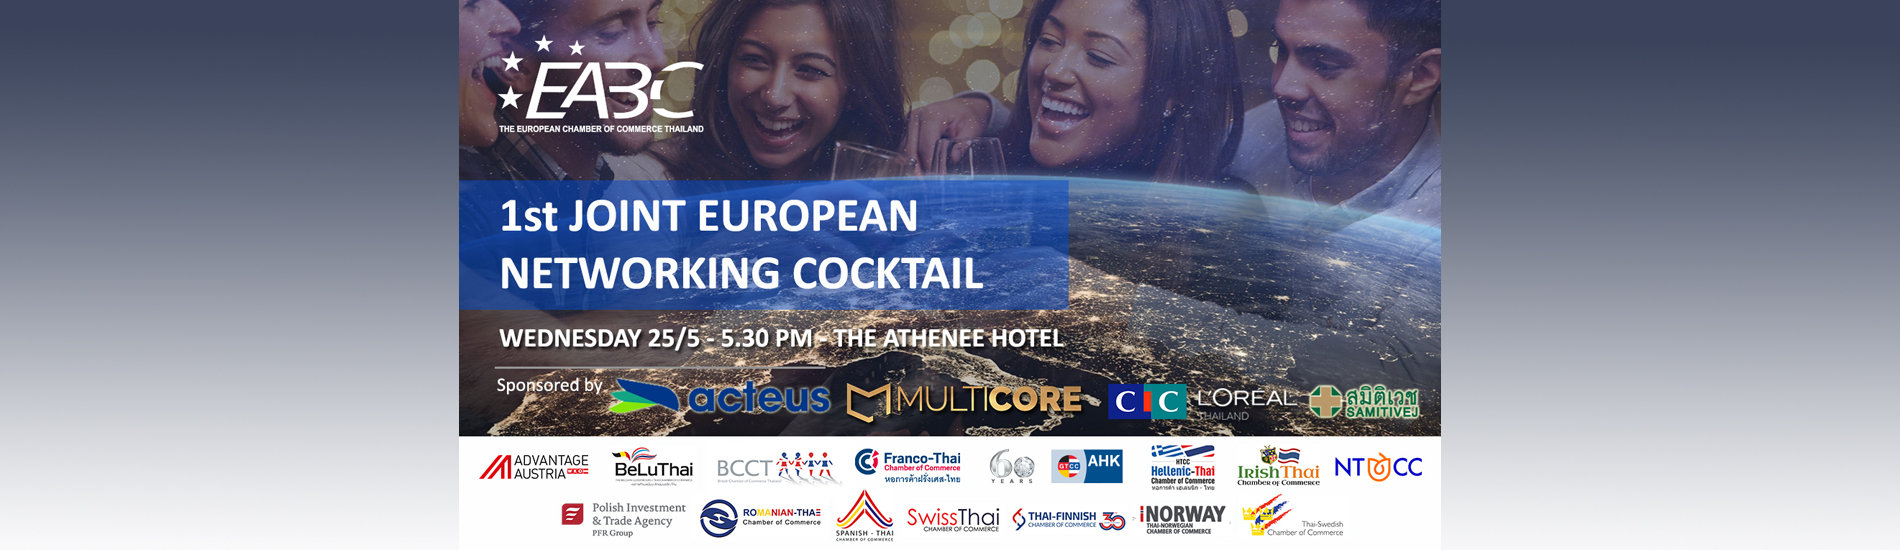 EABC Joint European Networking Cocktail